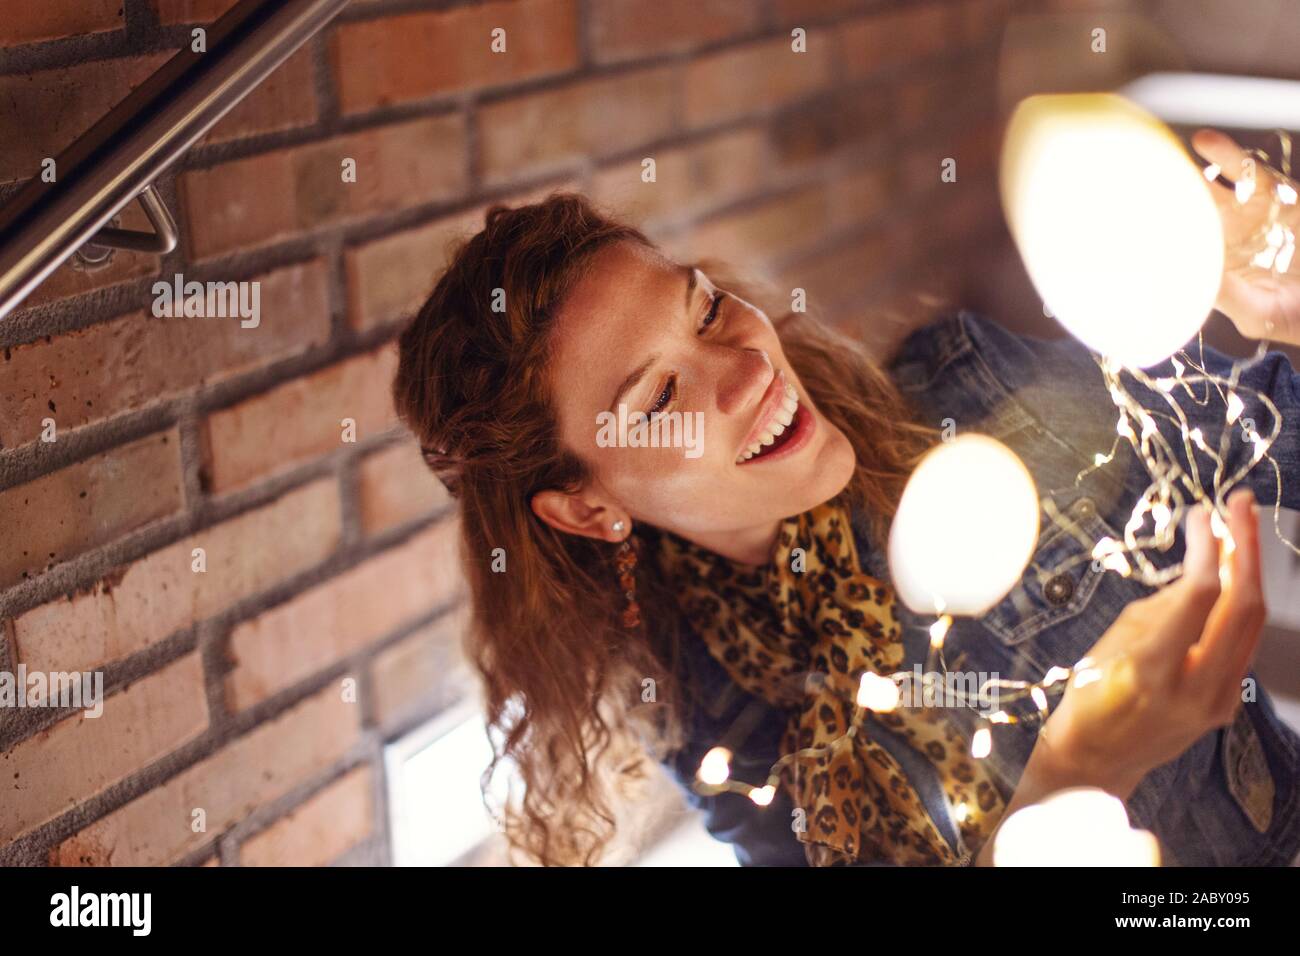 20s cheerful redhead Caucasian woman Playing with fairy lights outdoors Banque D'Images